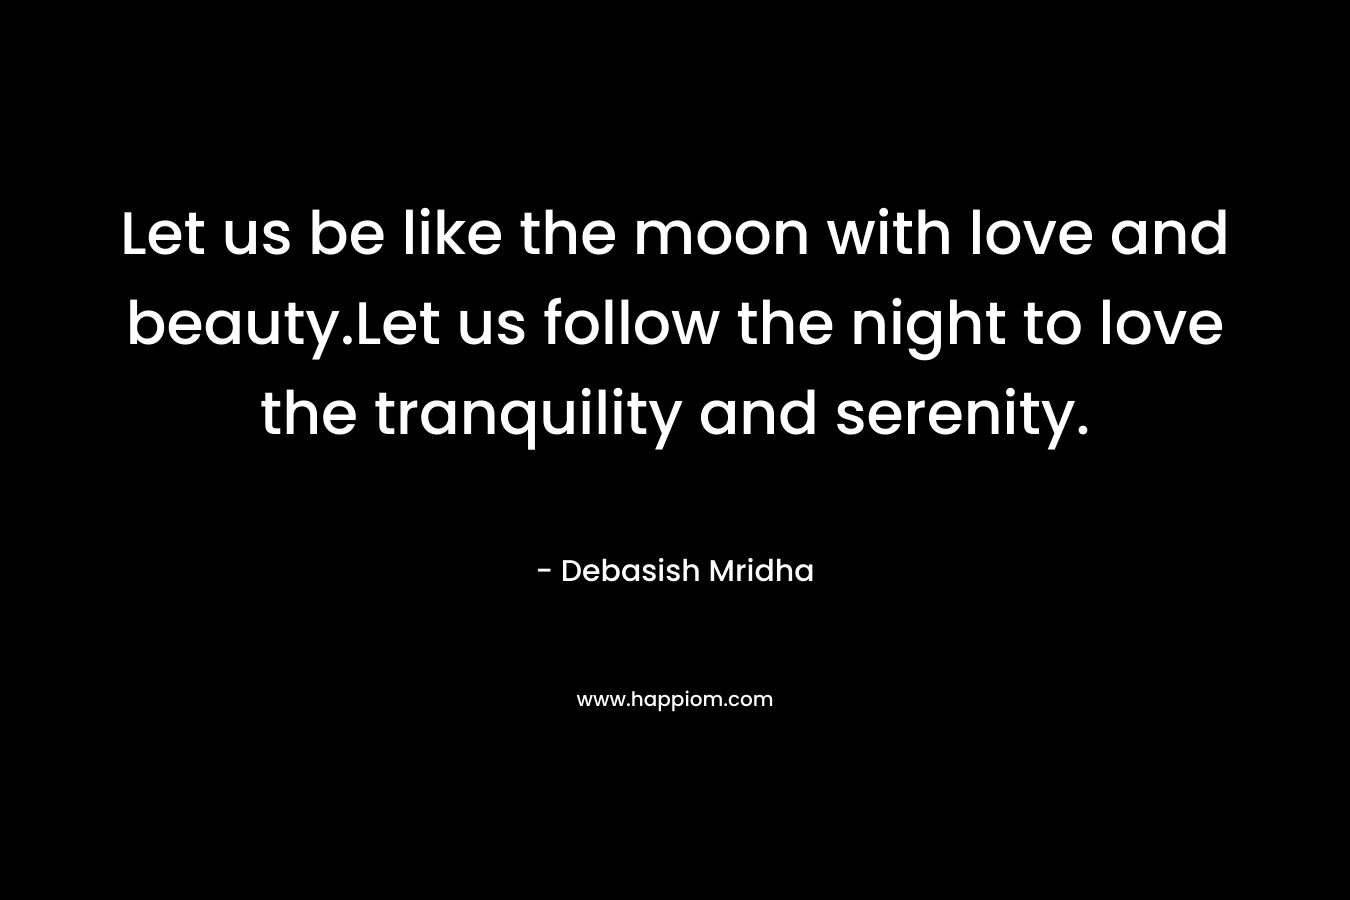 Let us be like the moon with love and beauty.Let us follow the night to love the tranquility and serenity.